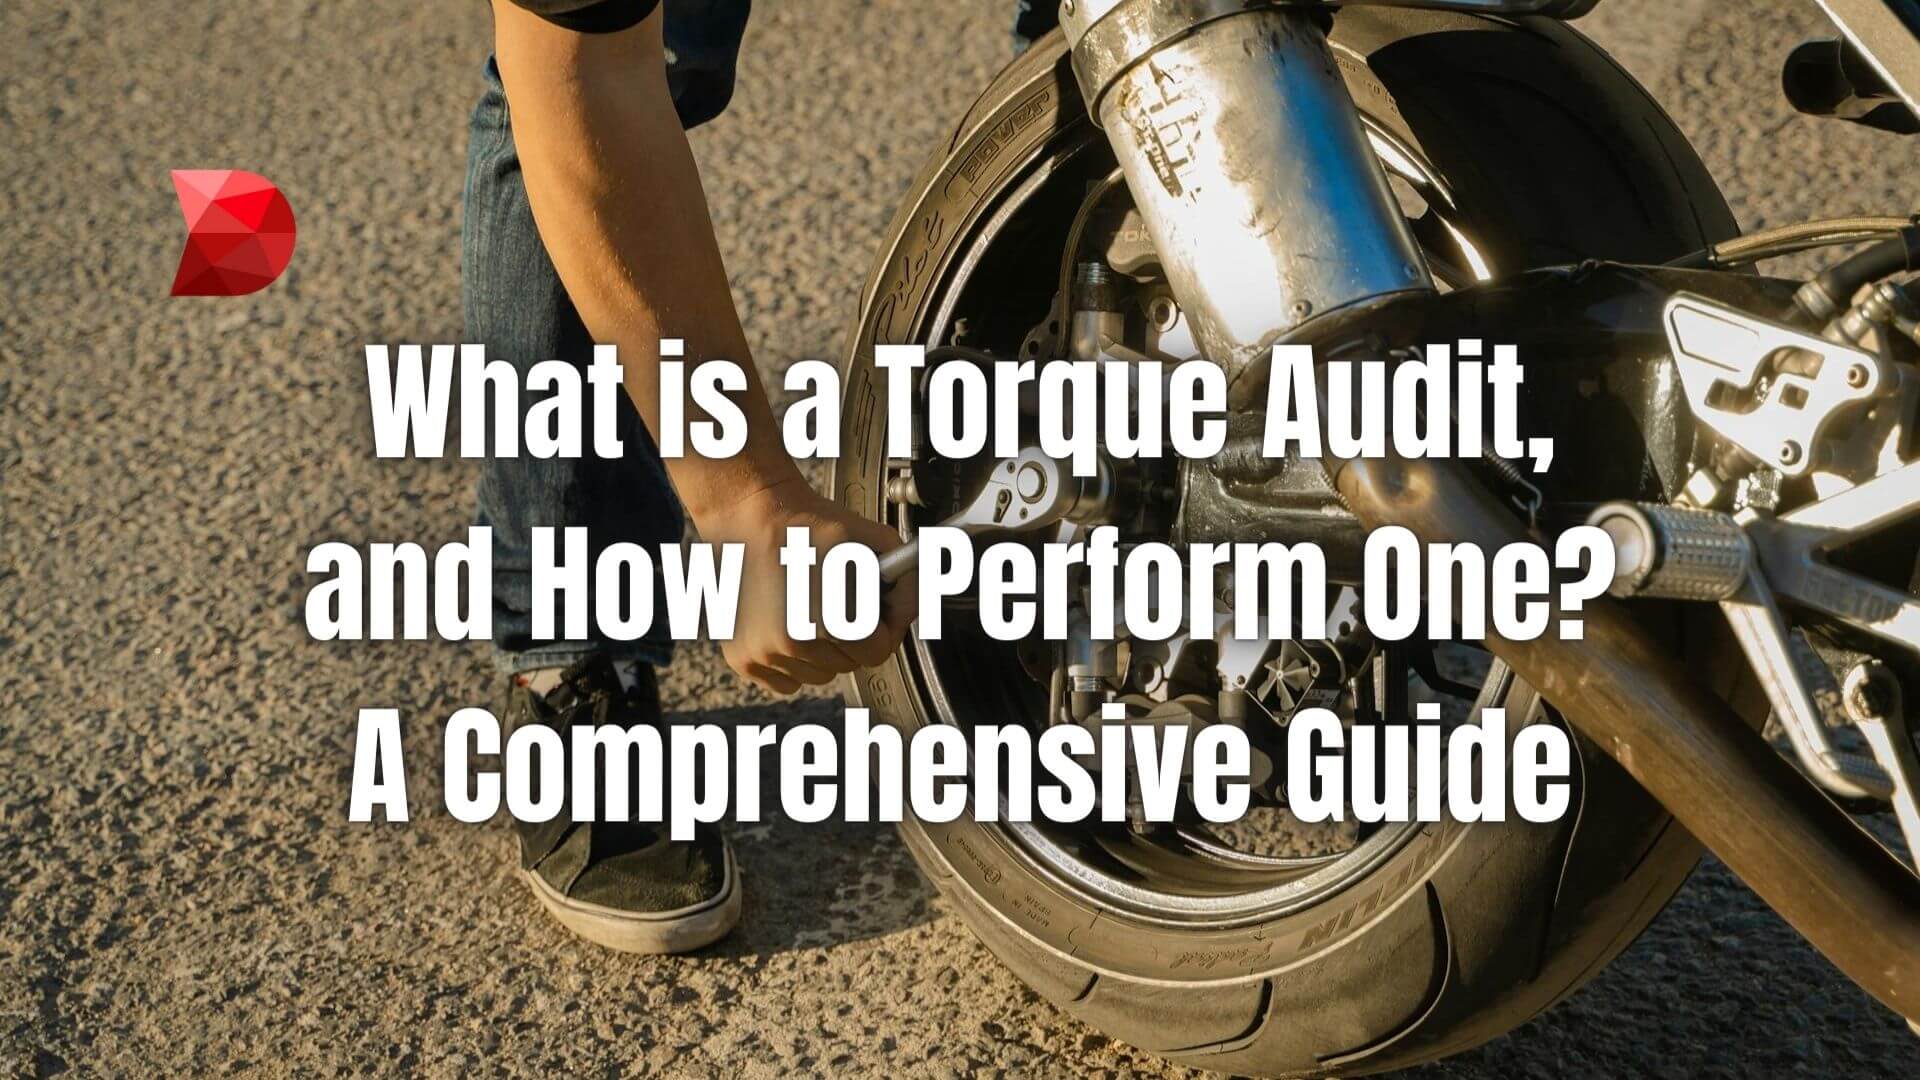 Elevate your torque audit skills with our full guide. Click here to explore techniques and tools for conducting accurate and reliable audits.